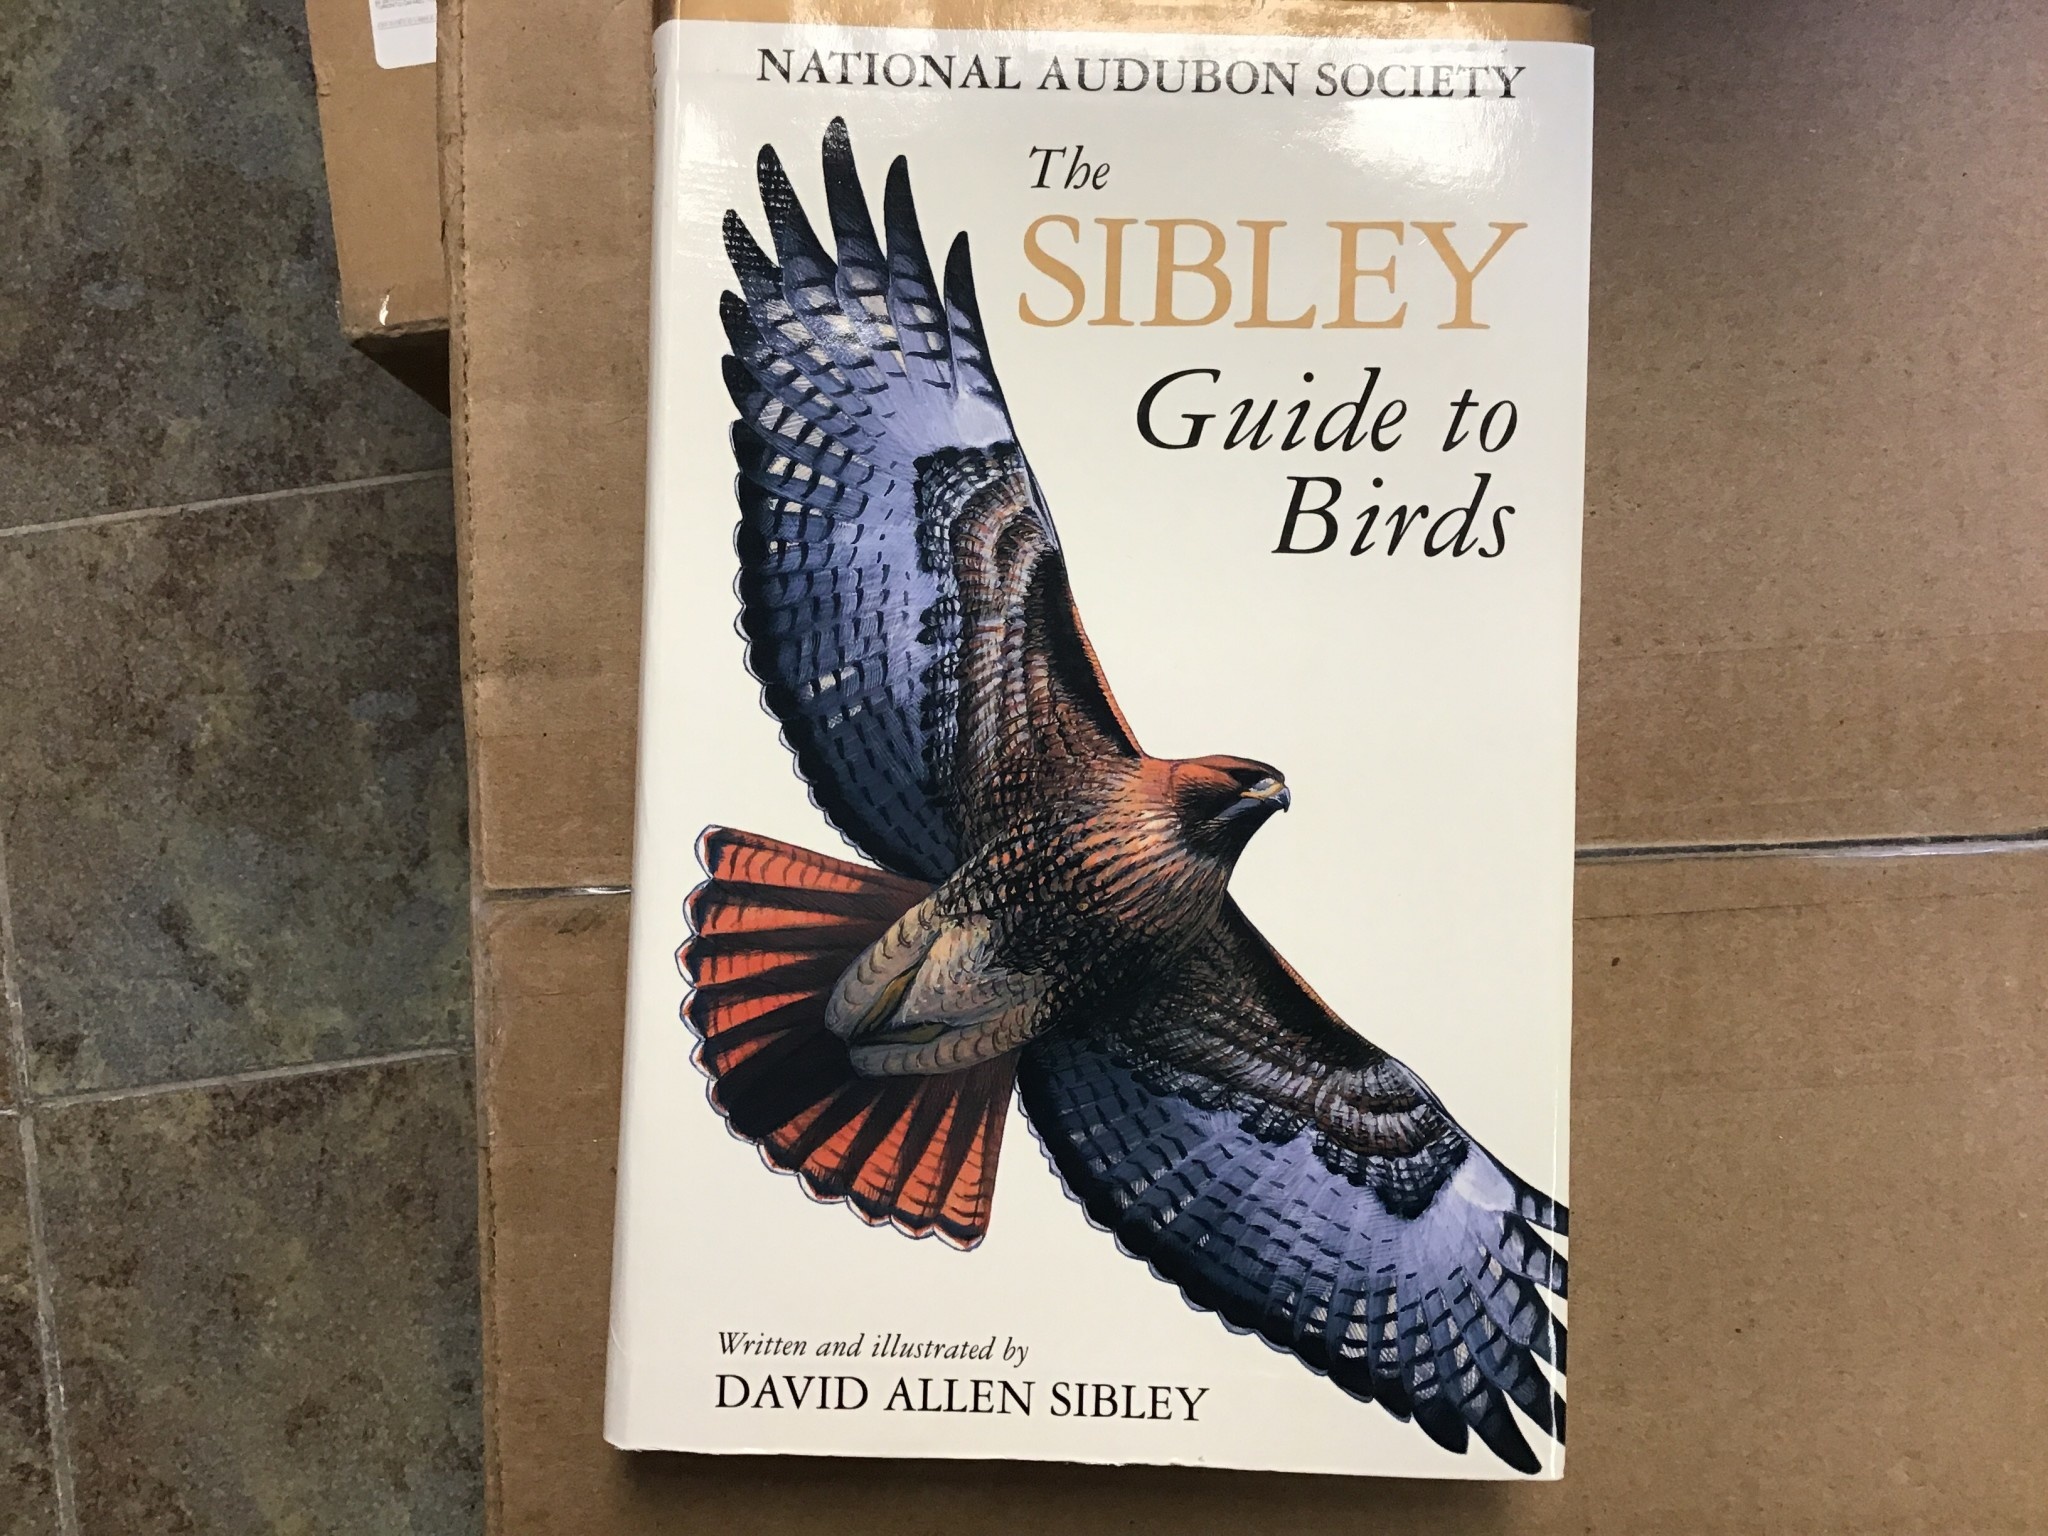 SIBLEY GUIDE TO BIRDS